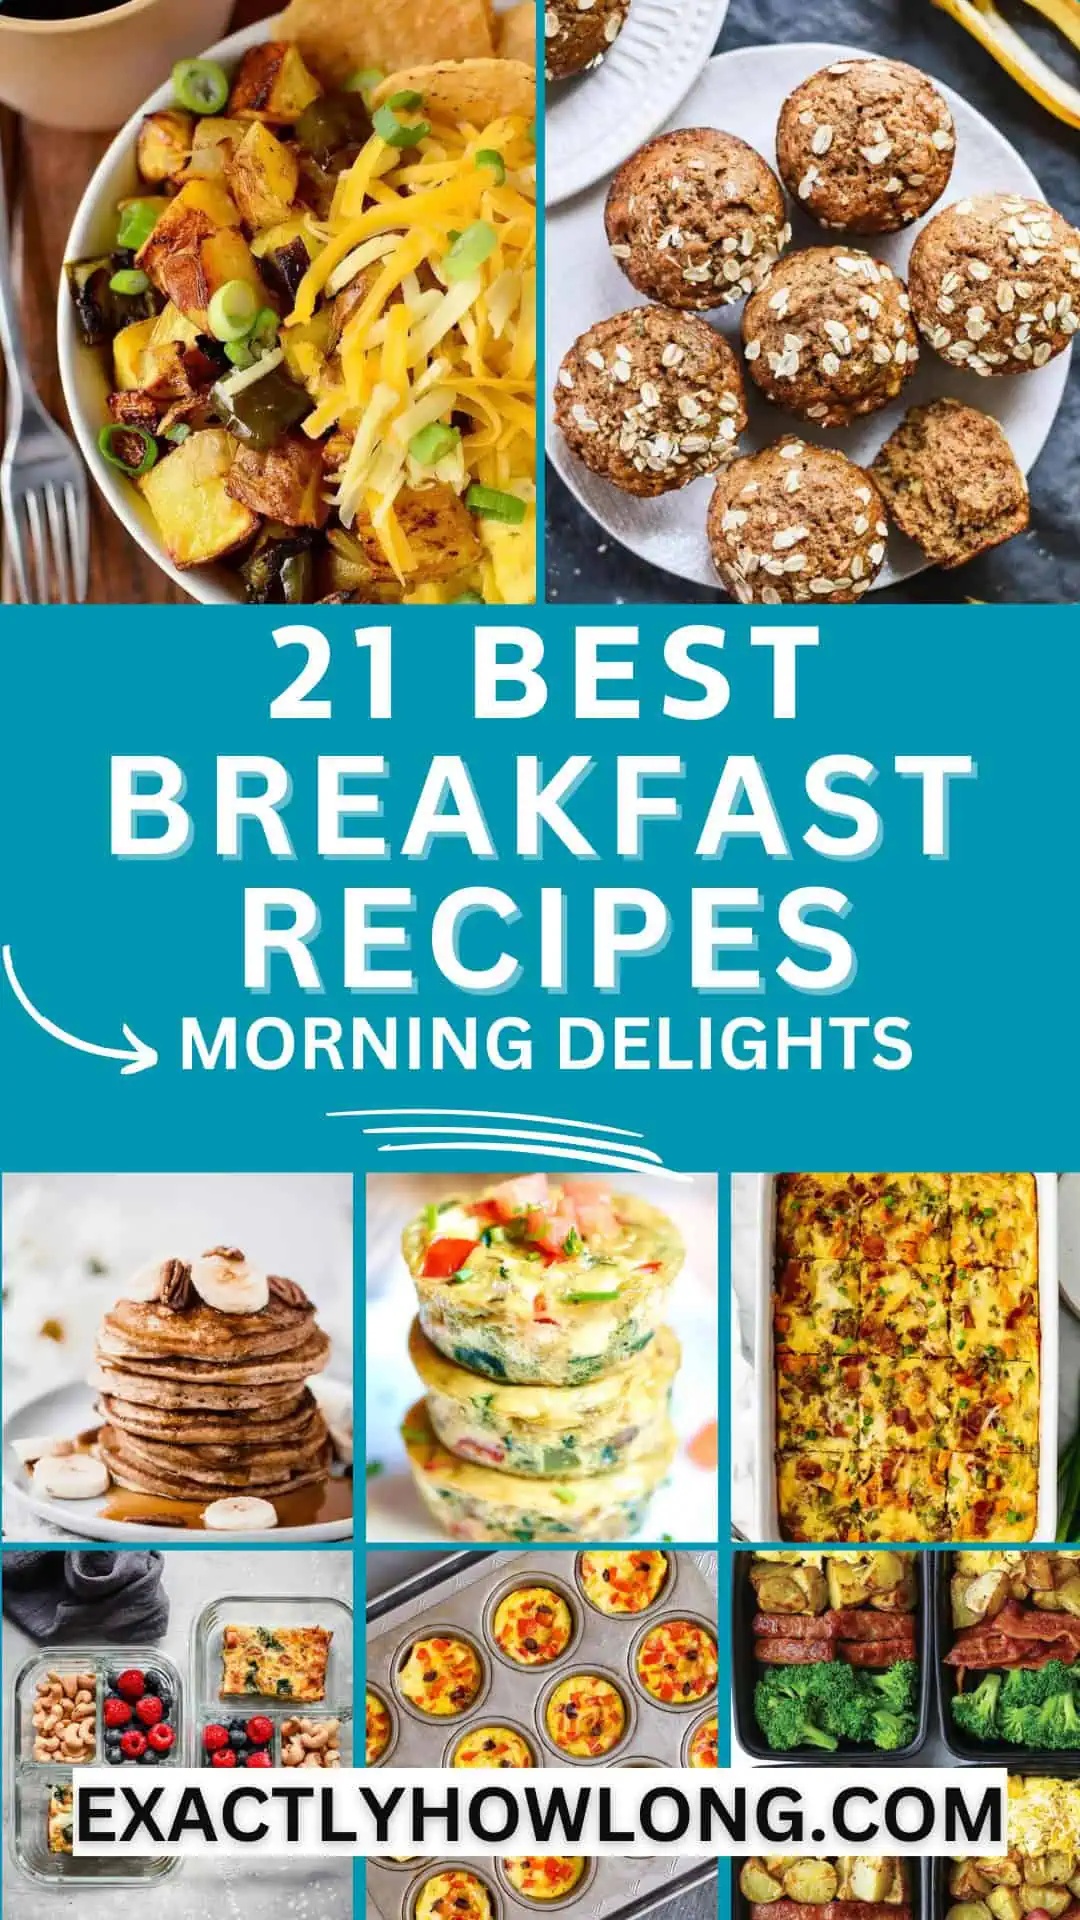 Breakfast meal prep ideas for a healthy start to the week - quick breakfast ideas for work on the go.